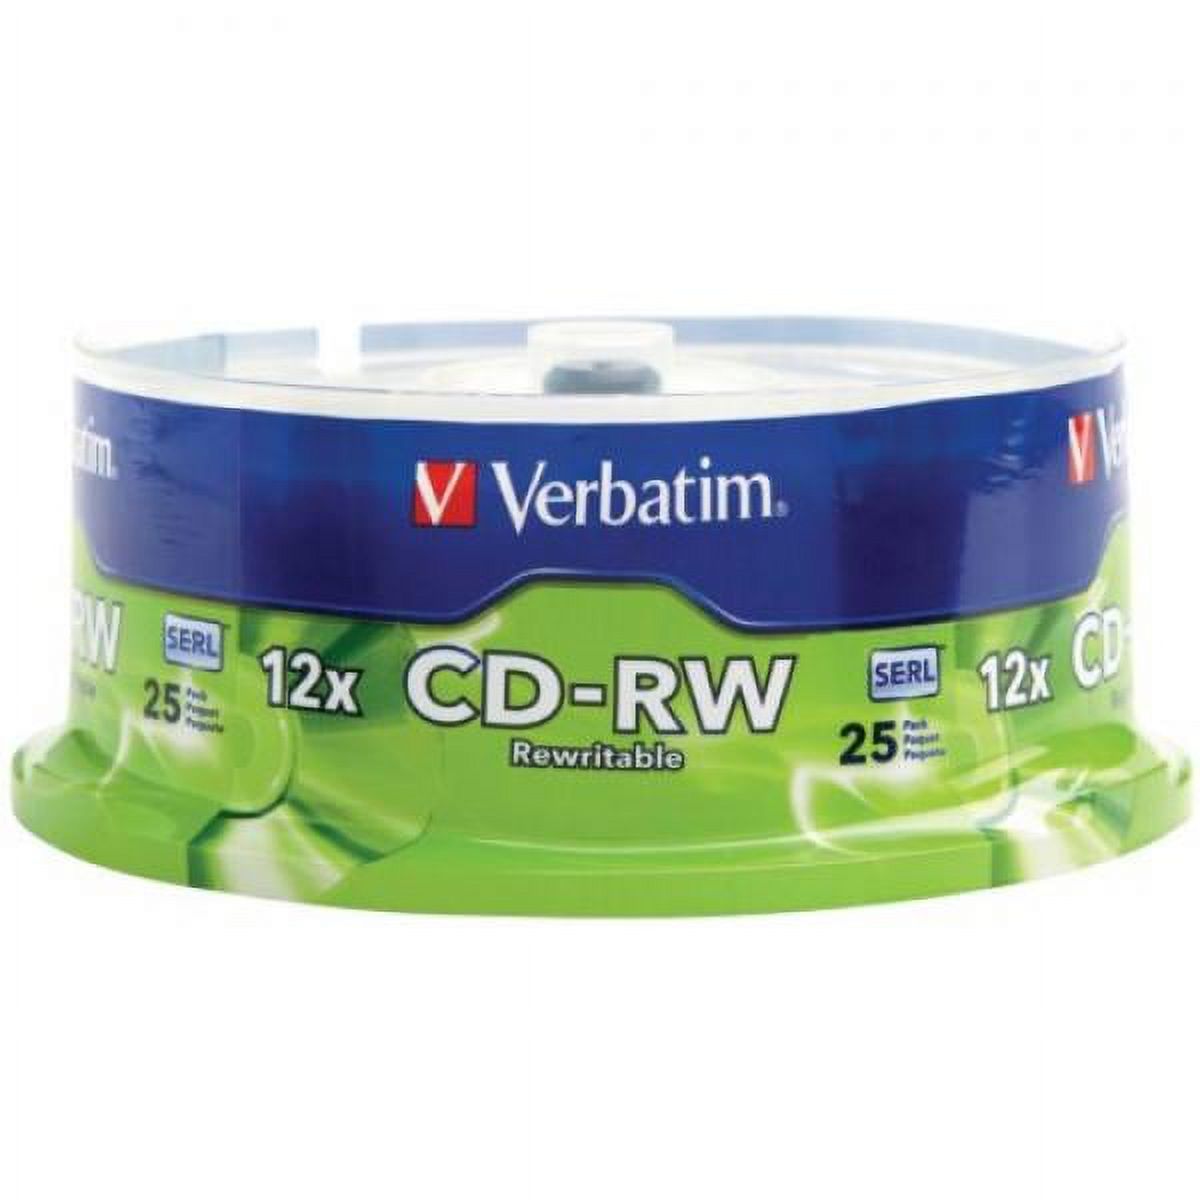 Verbatim 700MB 4x-12x 80 Minute Silver Rewritable Disc CD-RW, 25 Disc Spindle 95155 - image 1 of 8